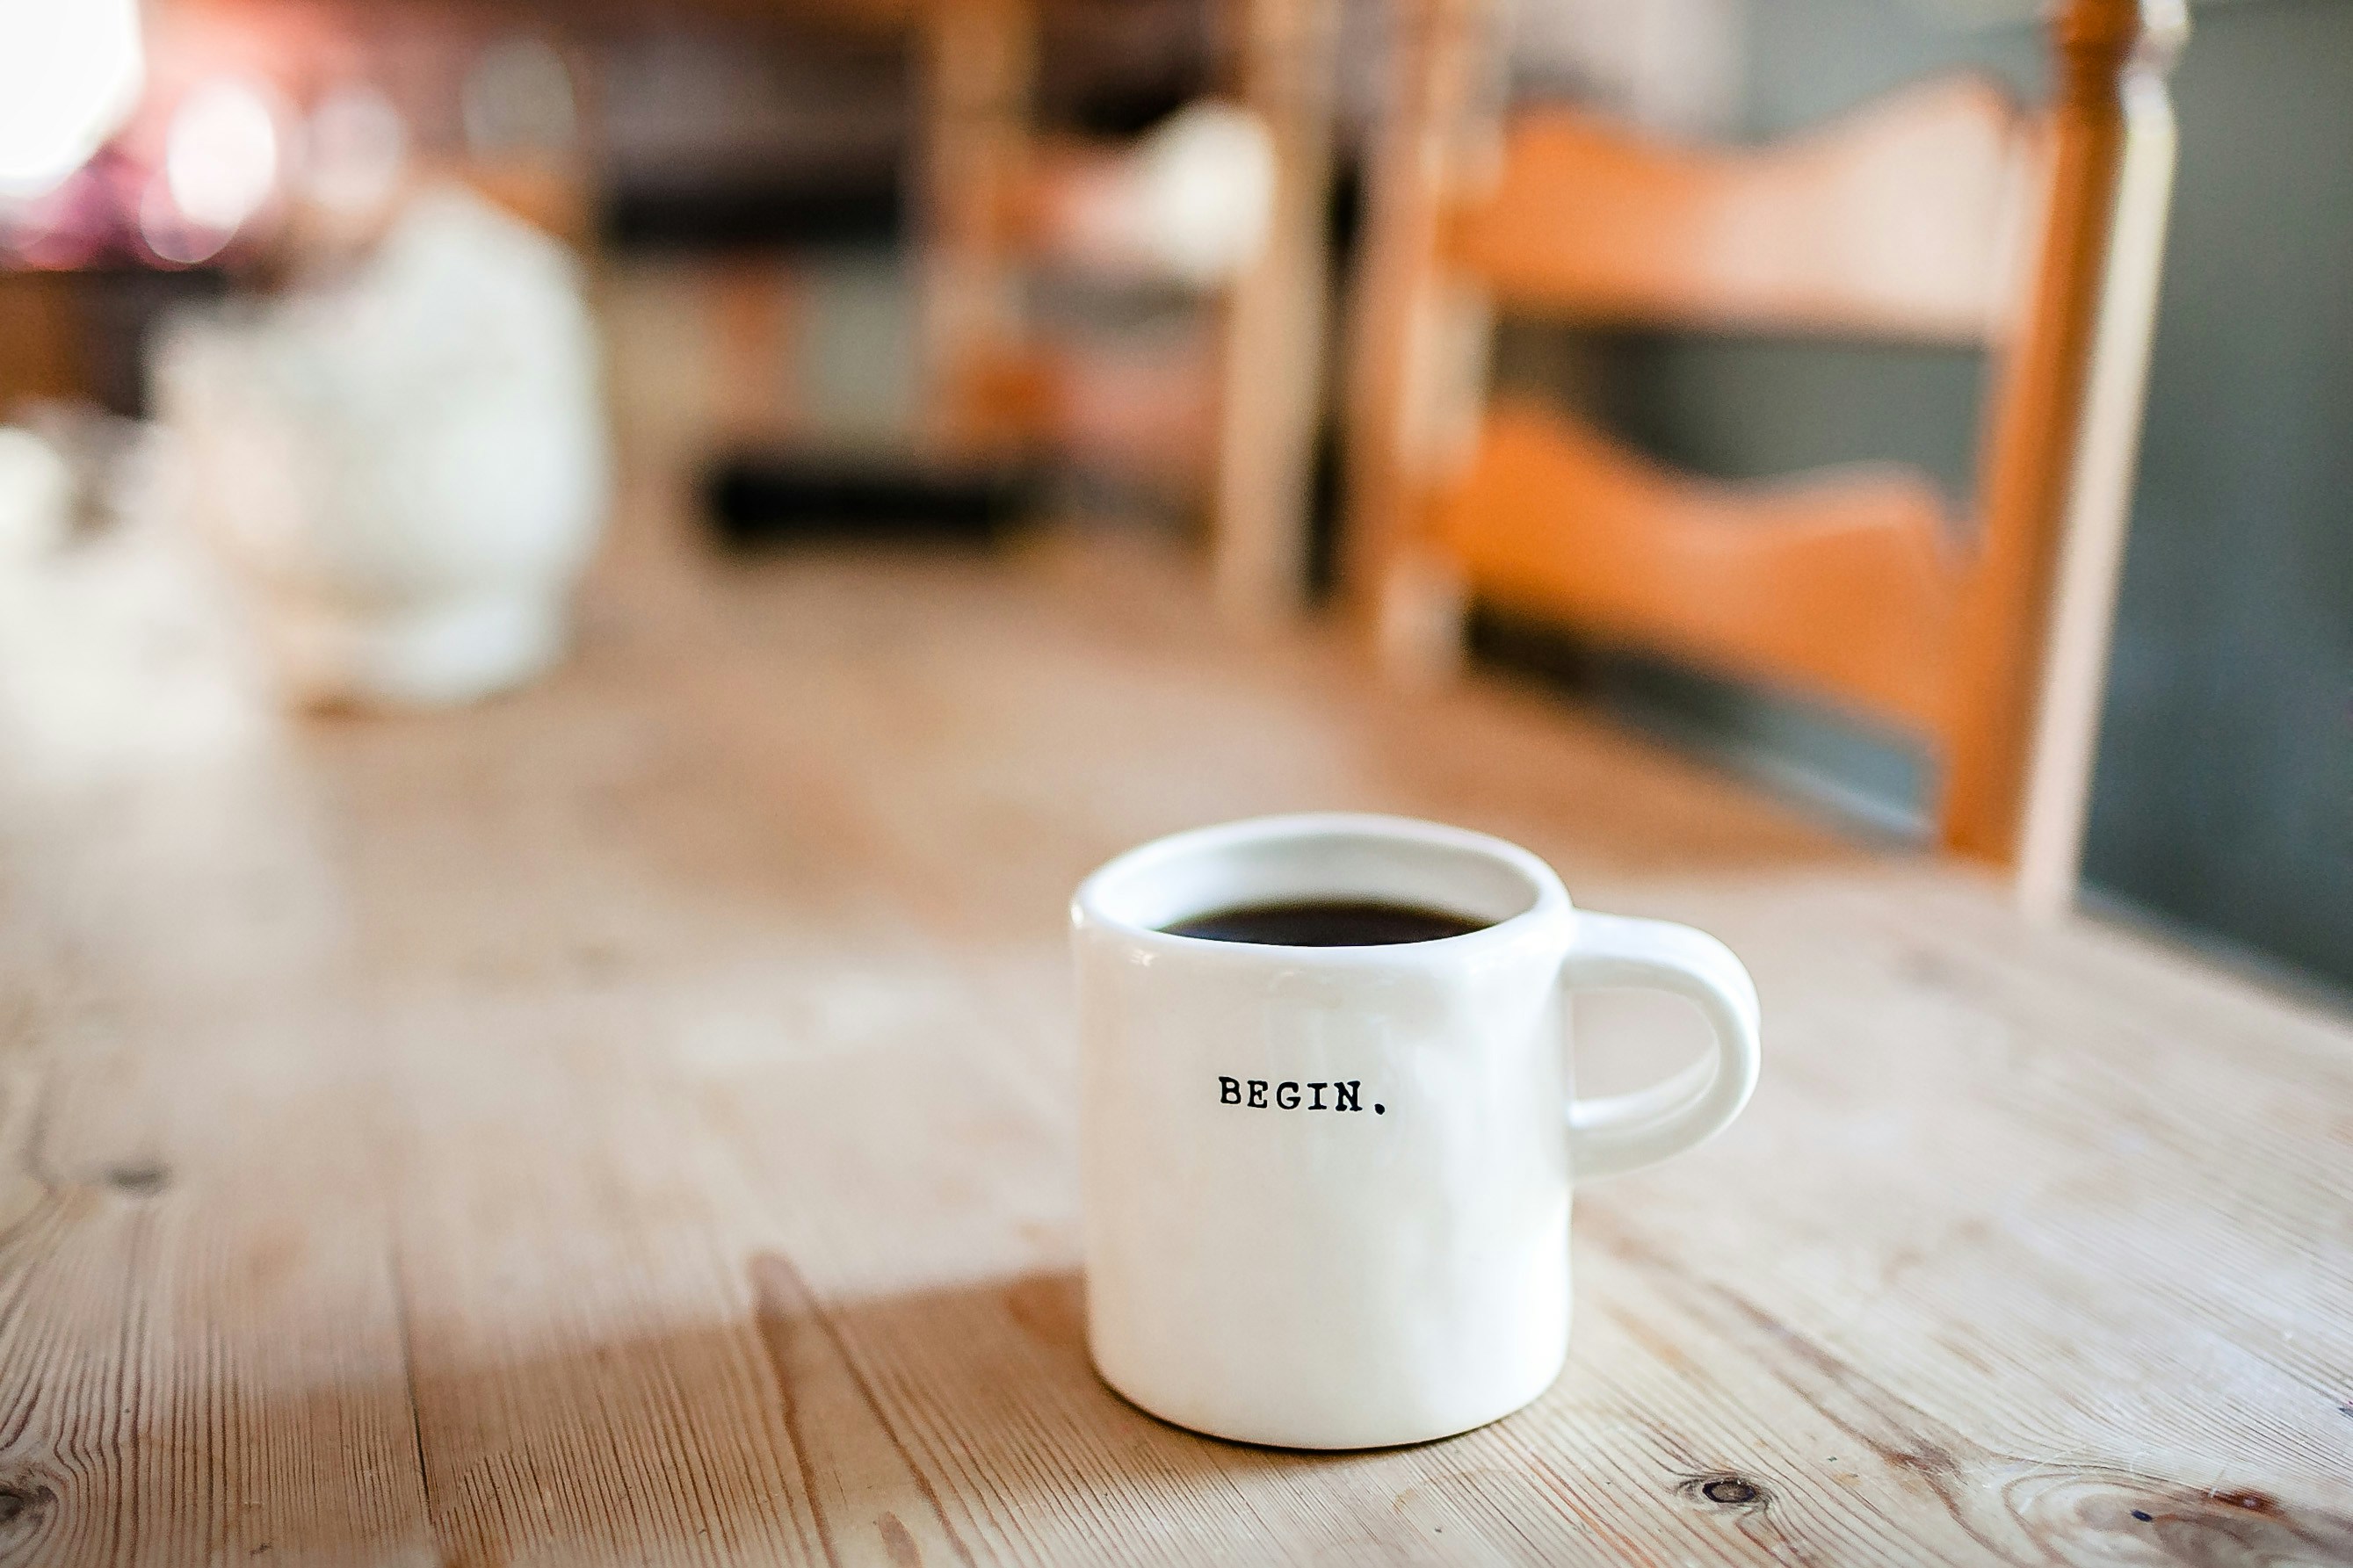 Photo of a coffee cup on a table with "begin" written on it